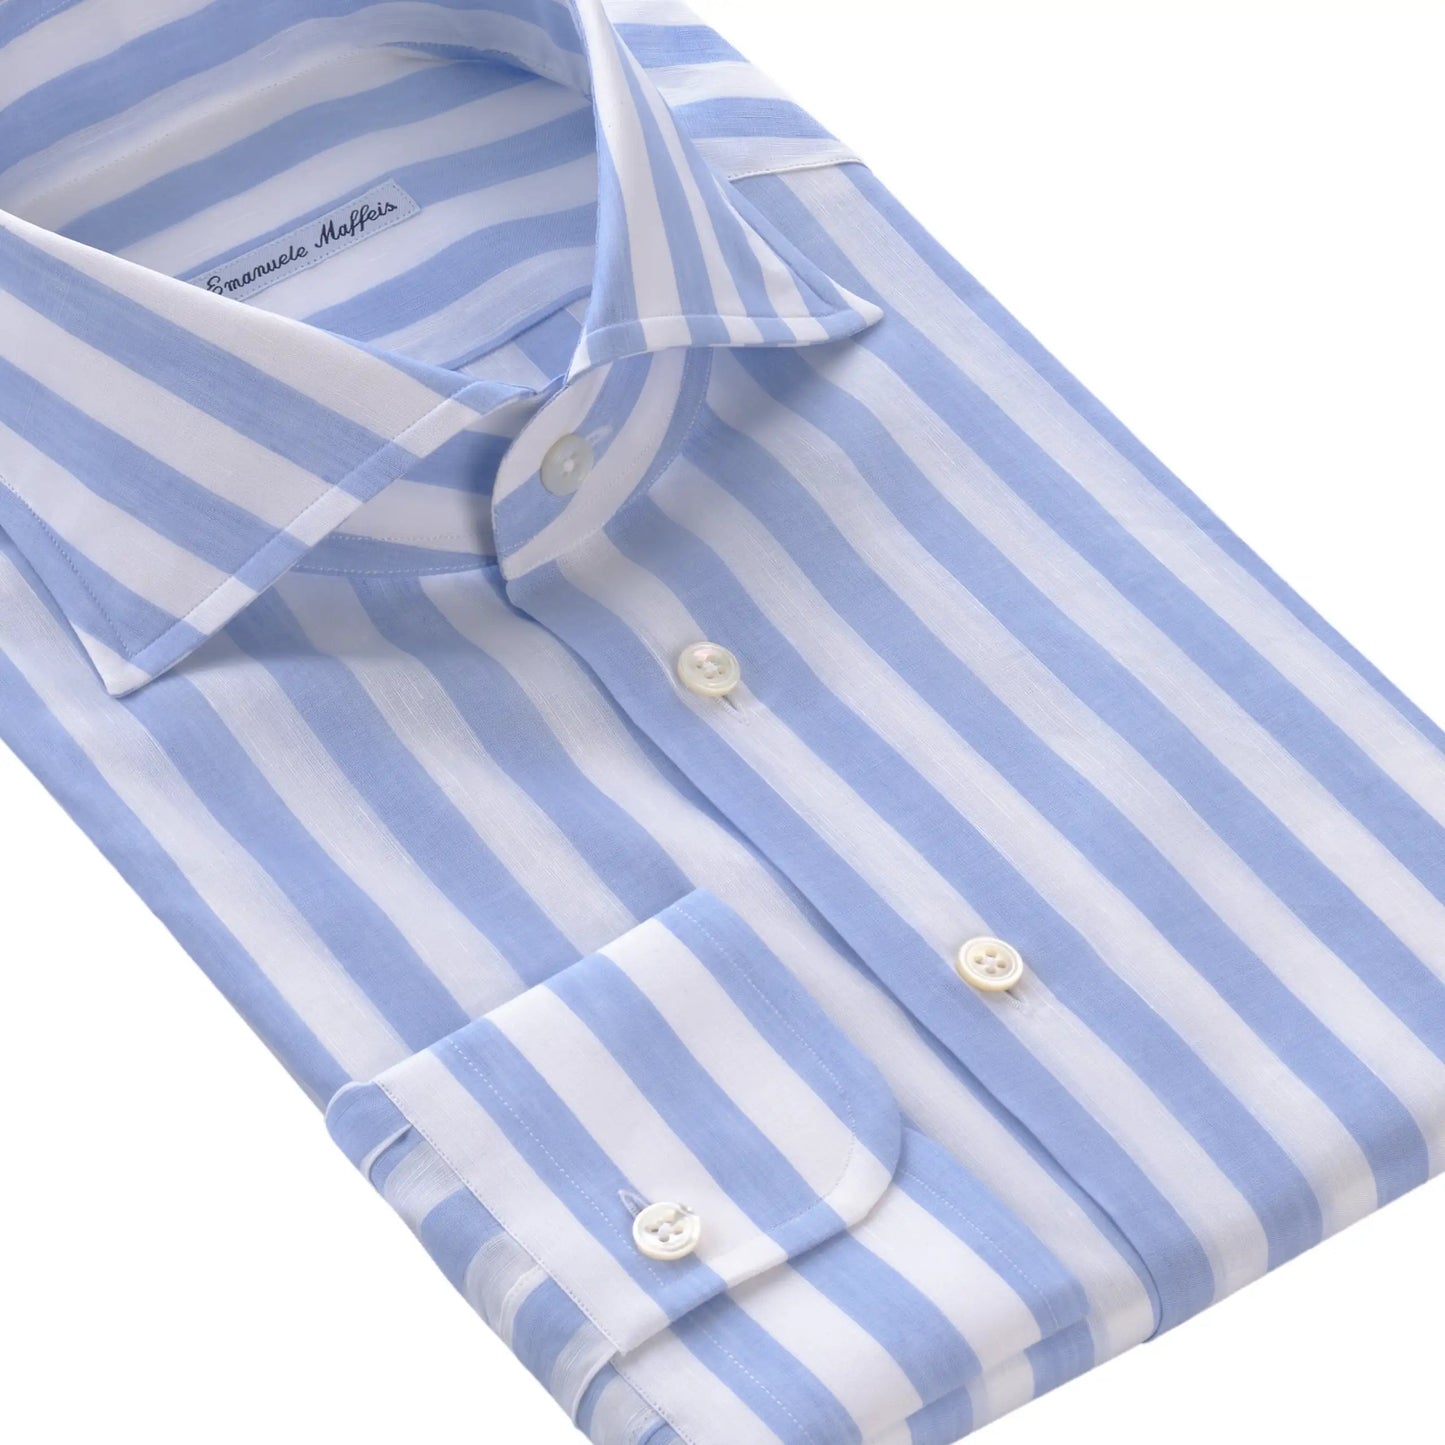 Emanuele Maffeis Striped Cotton - Linen Blend Shirt in White and Blue - SARTALE